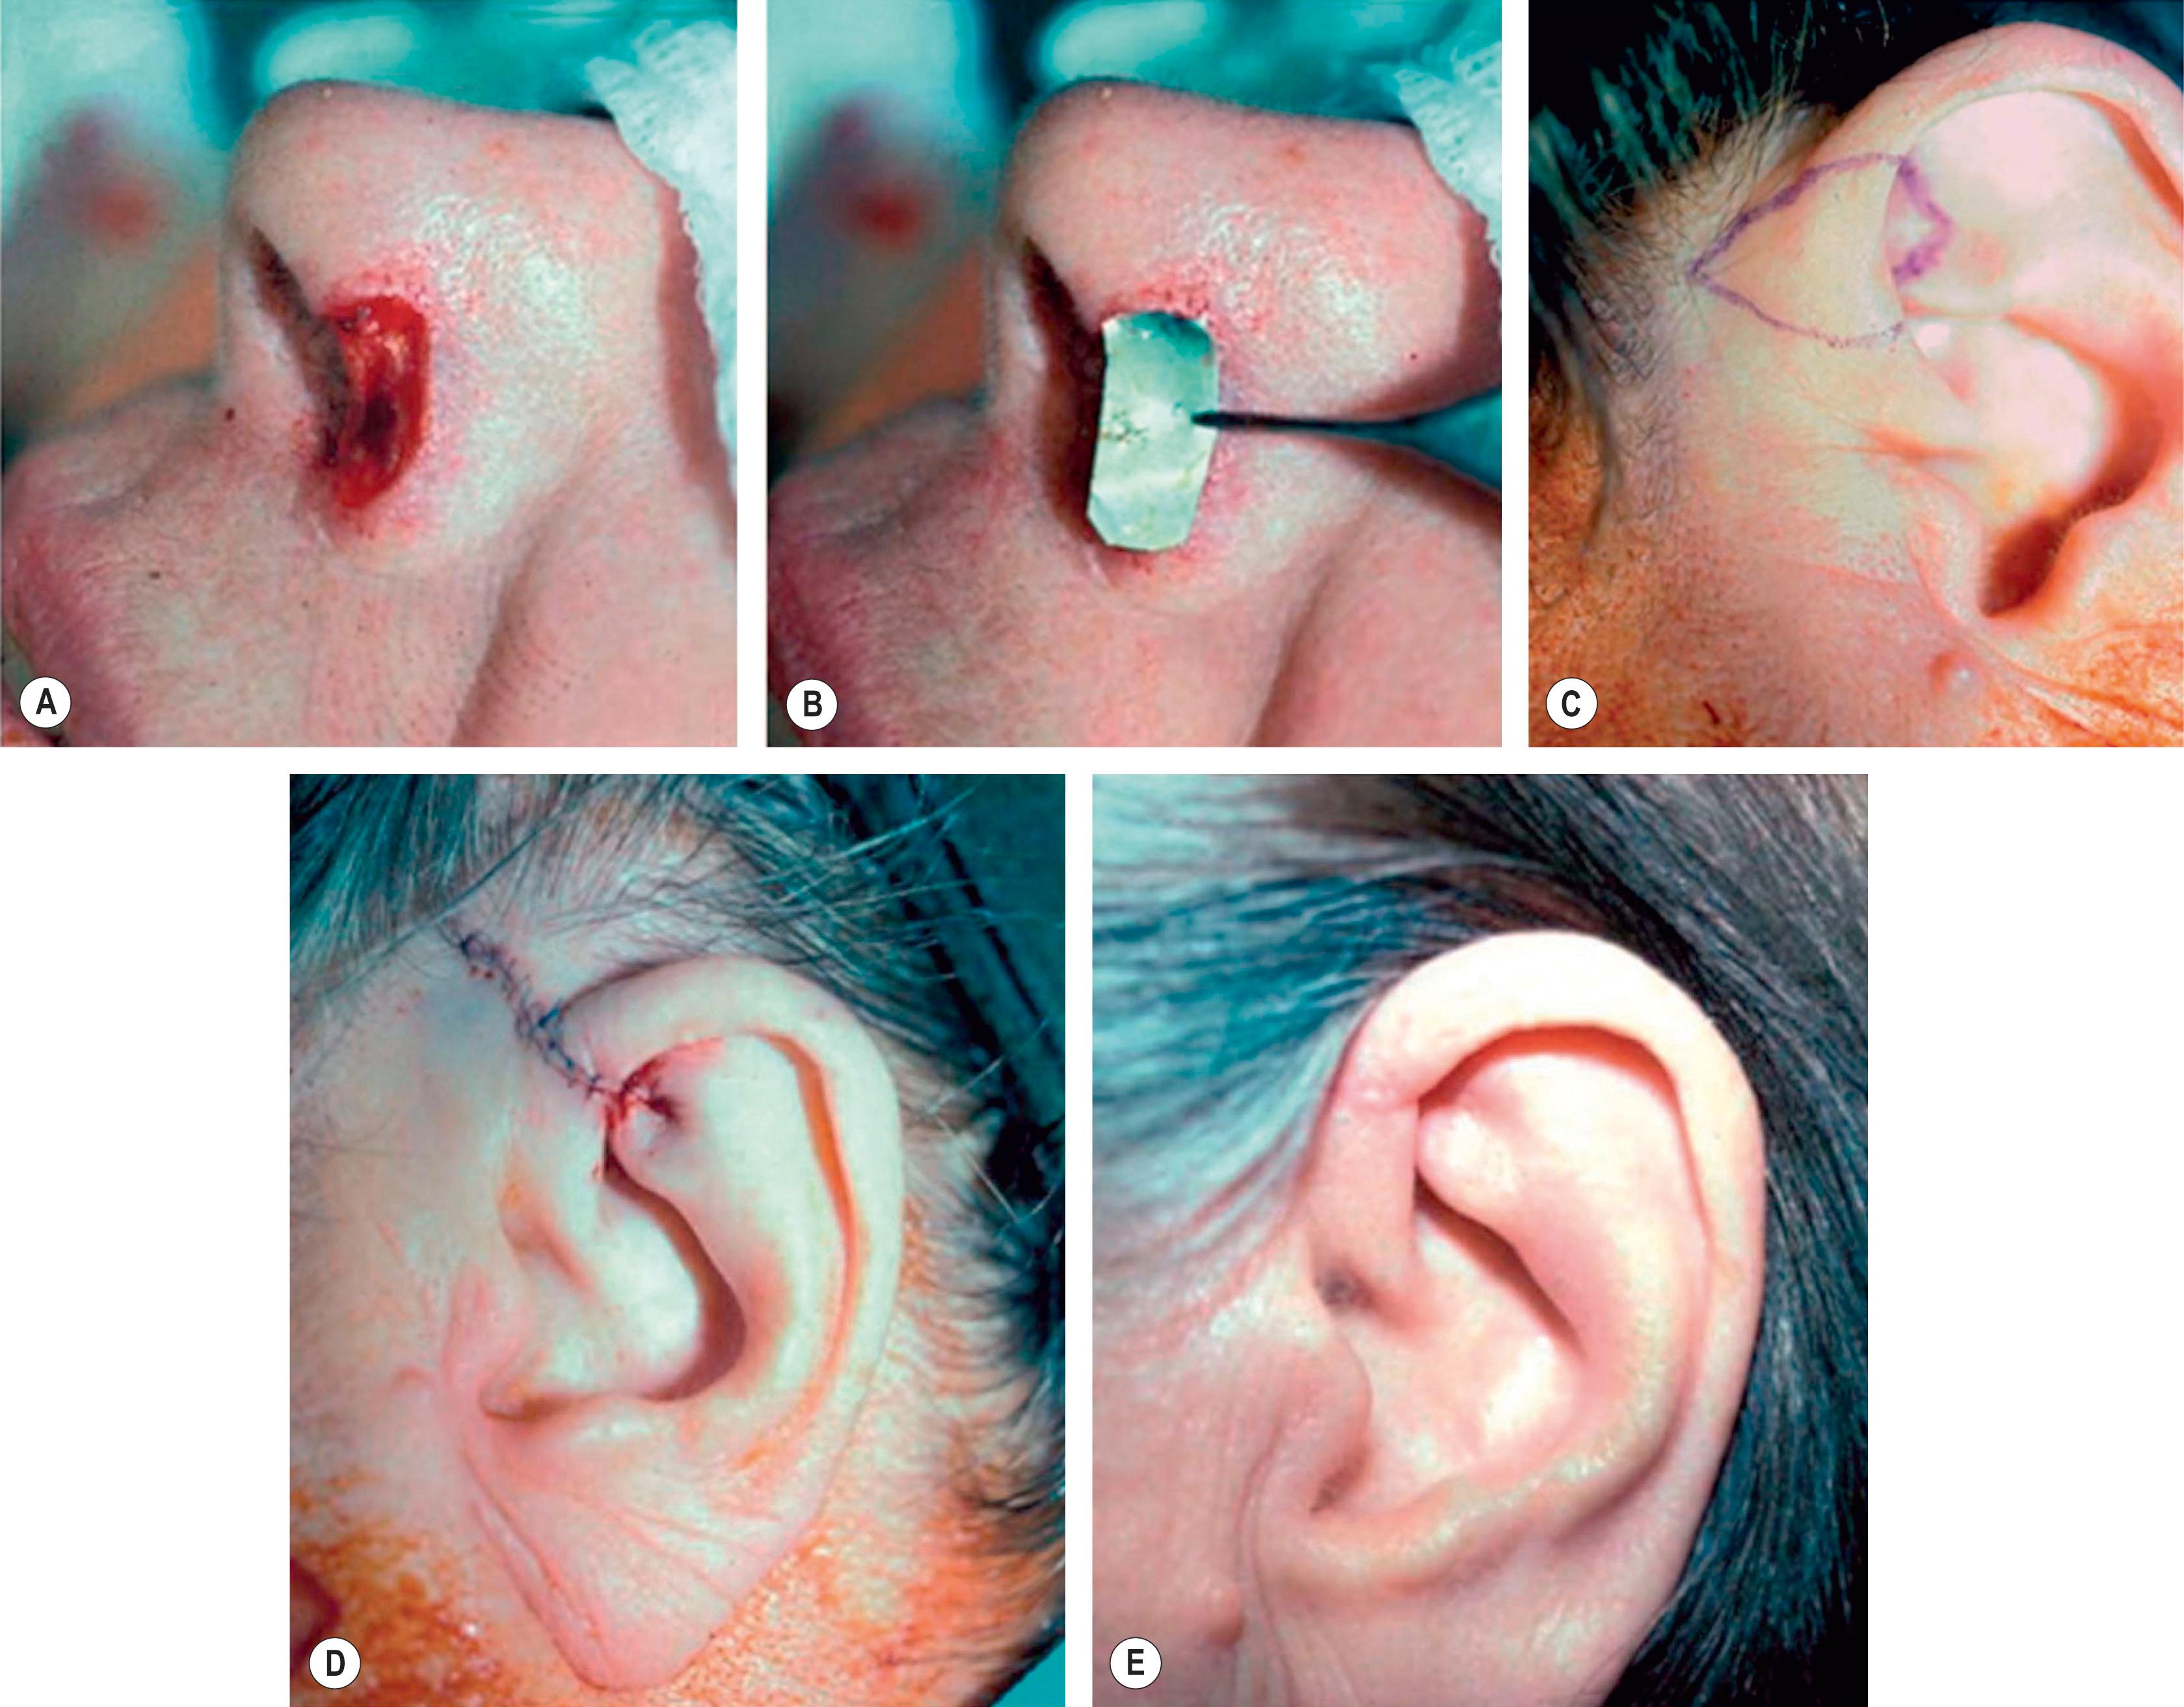 Figure 19.6, Technique 2: (A–C) A wider defect of the alar rim requires a larger composite graft from the helical base, as seen by the markings on the ear. (D,E) Closure of the defect is accomplished by running the dog-ear anteriorly into the hairline and posteriorly into the triangular fossa. A full-thickness wedge of cartilage must be removed from the triangular fossa to prevent buckling of the ear.